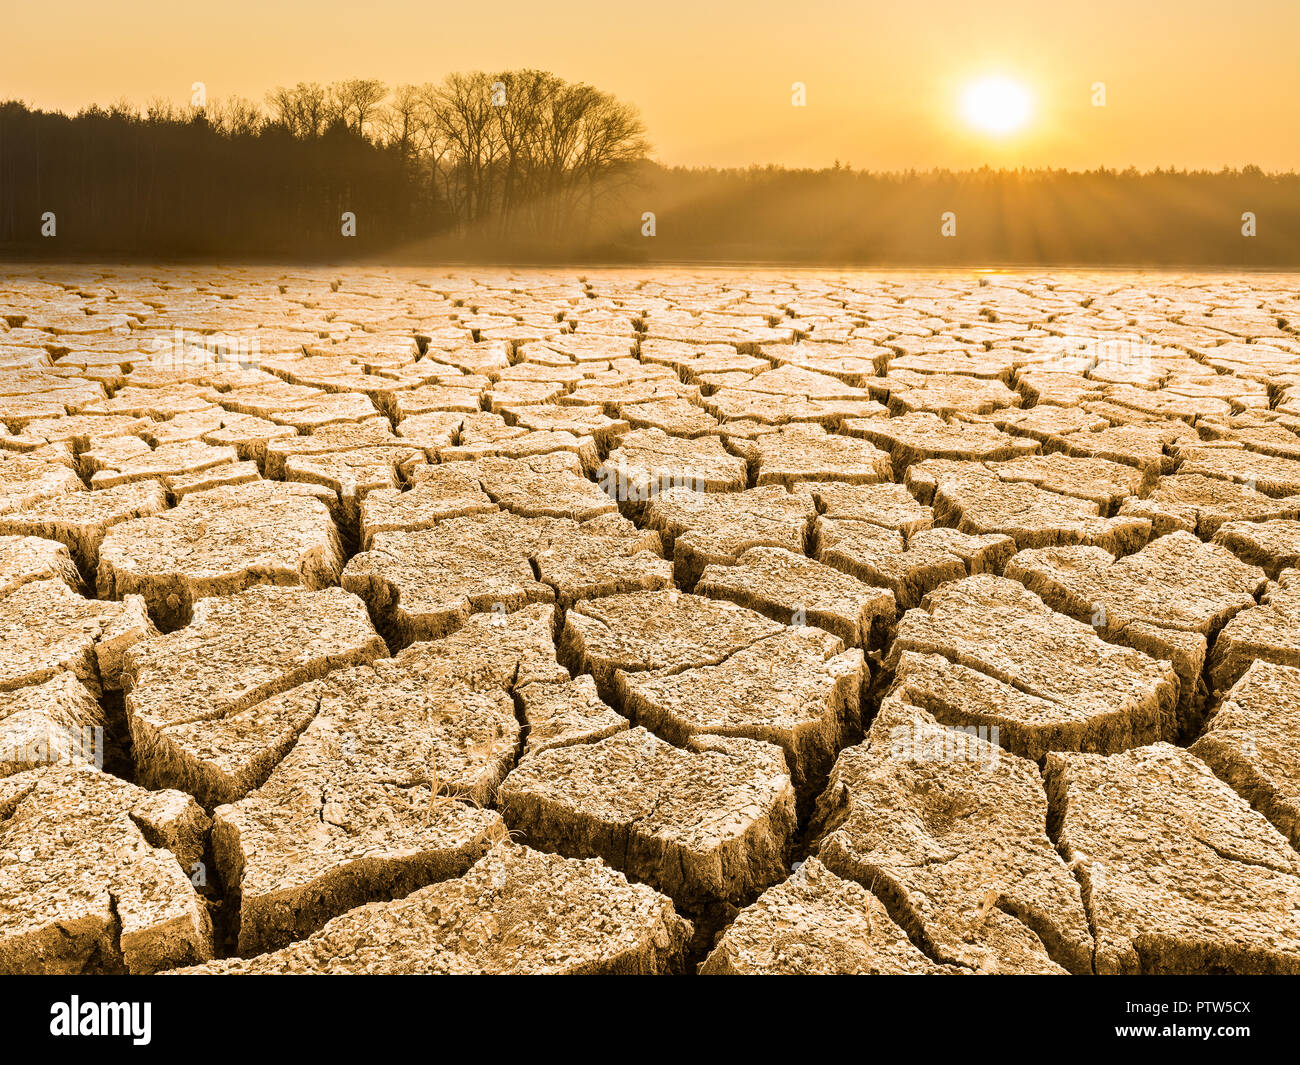 Parched cracked soil in landscape at sunrise. Close-up of drought in a sunlit waterless nature. View of forest, sky and glowing sun in a background. Stock Photo